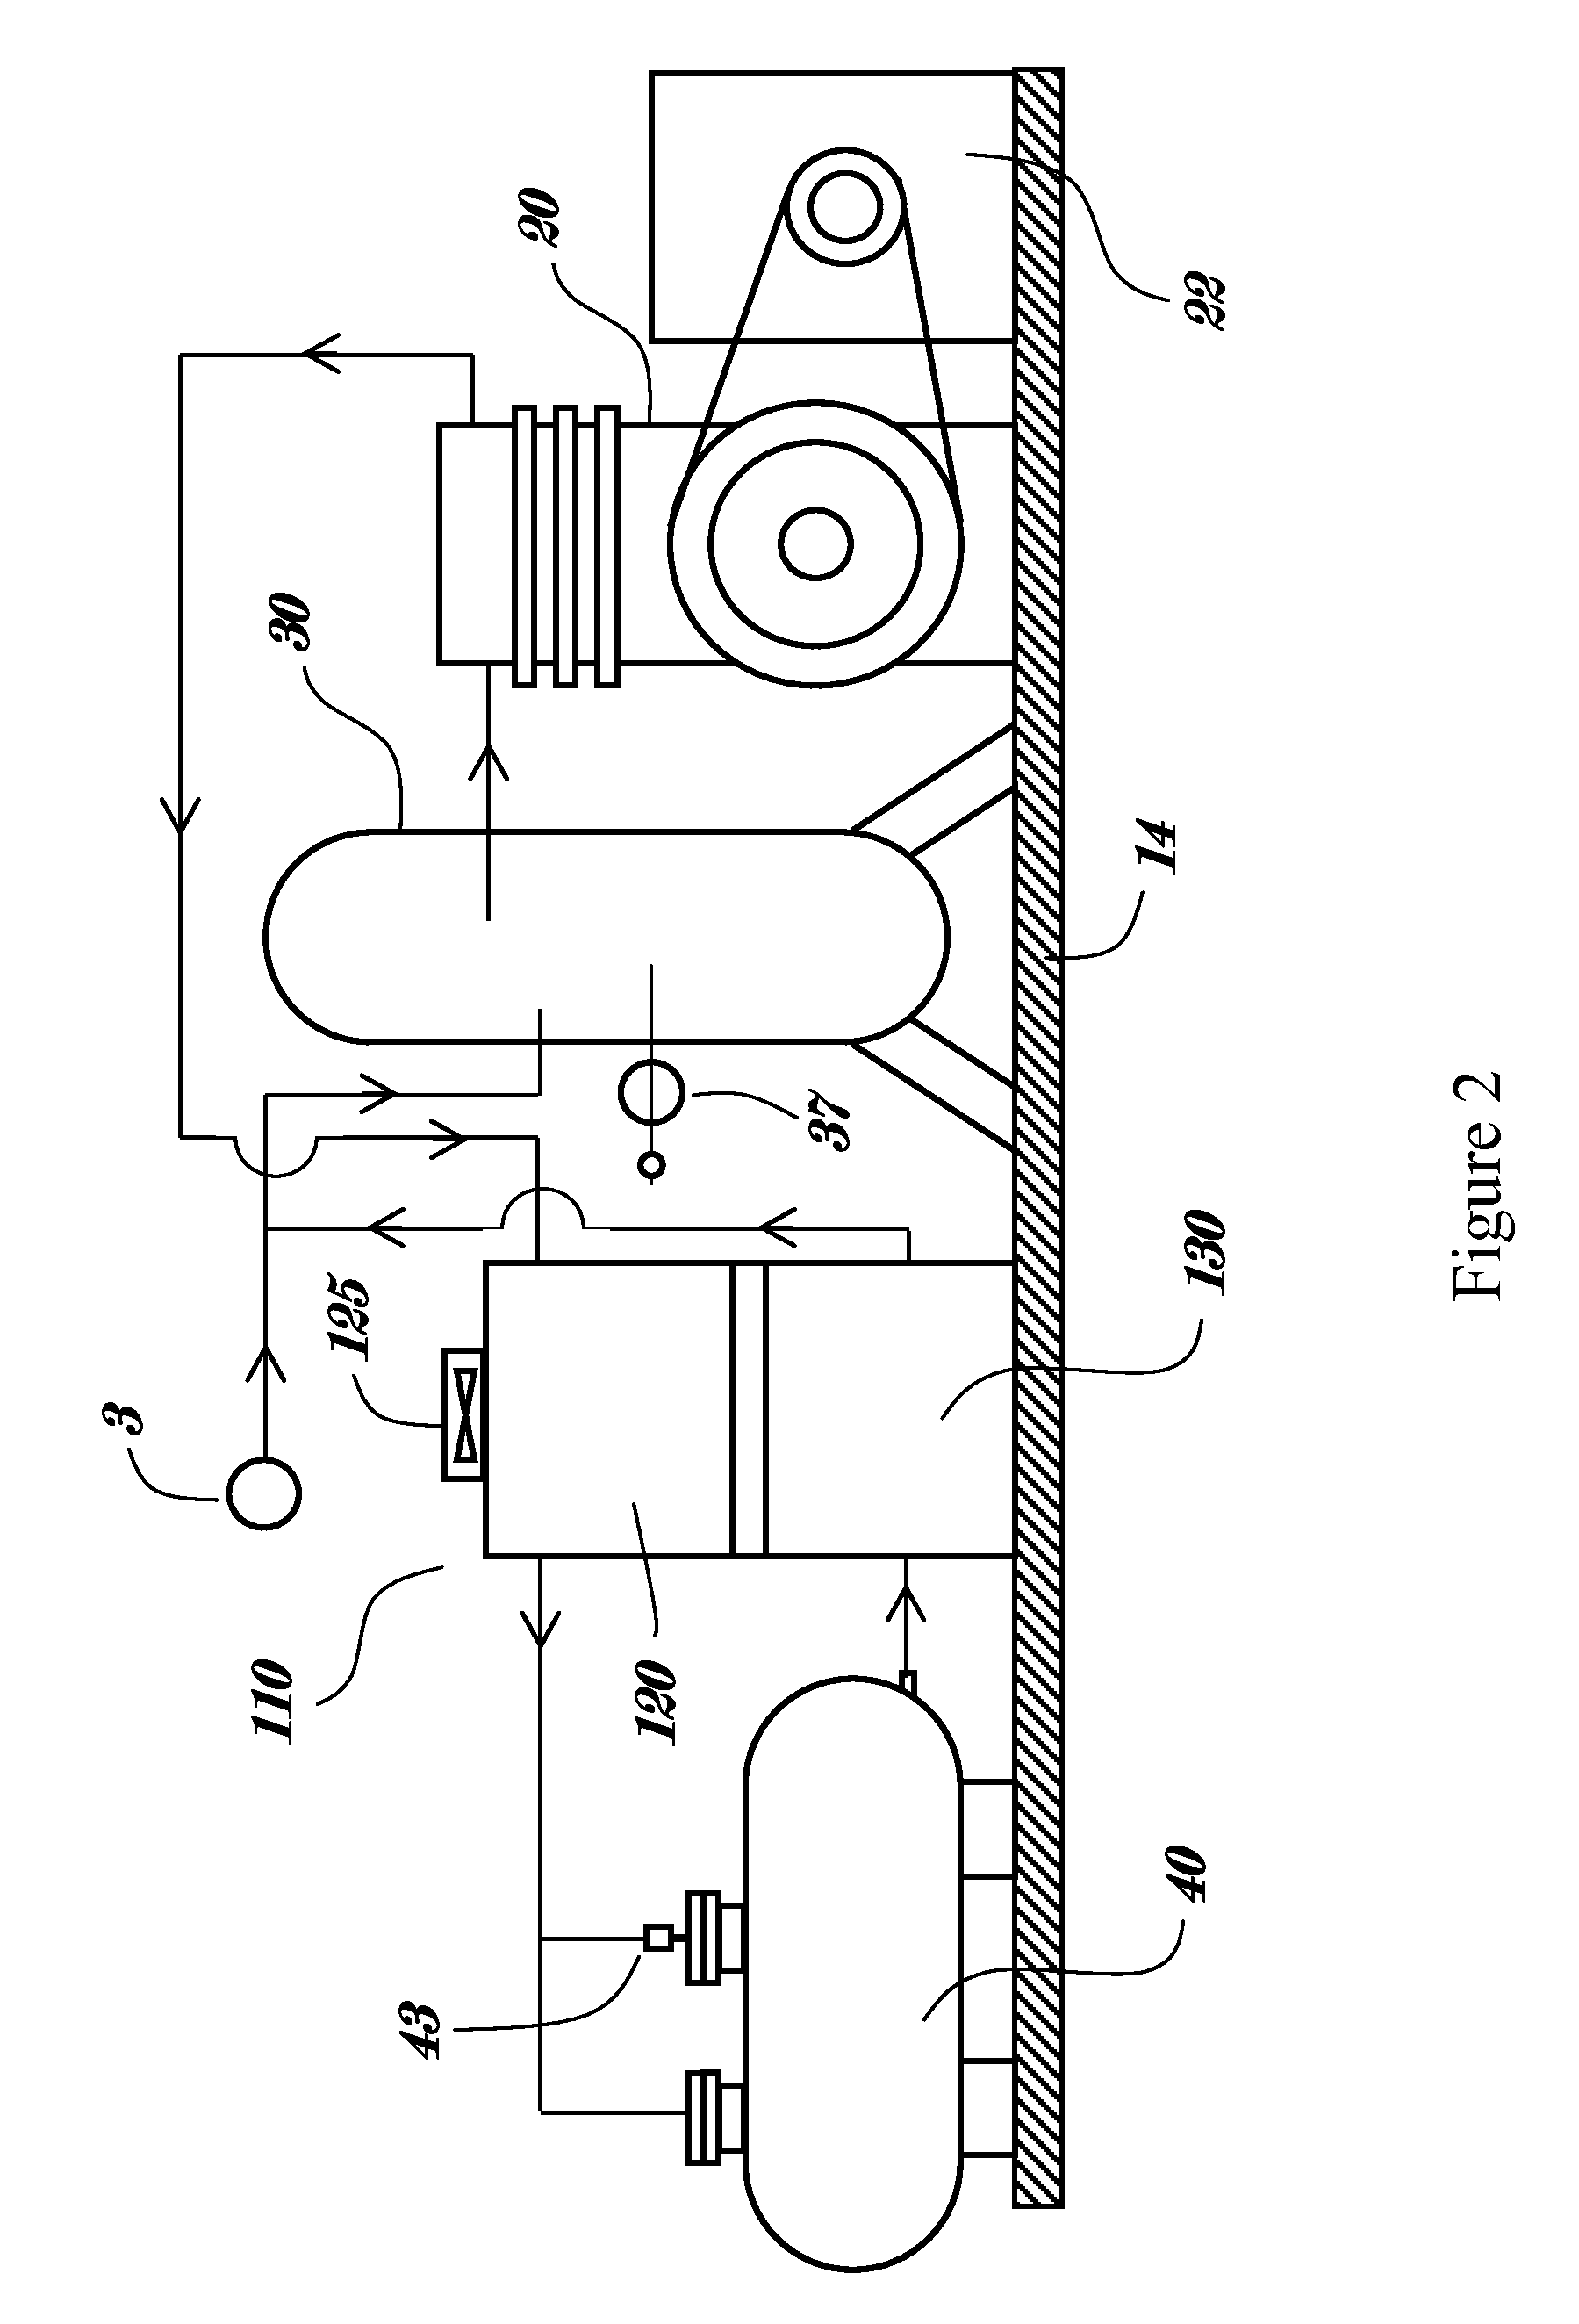 Method and system for propane extraction and reclamation